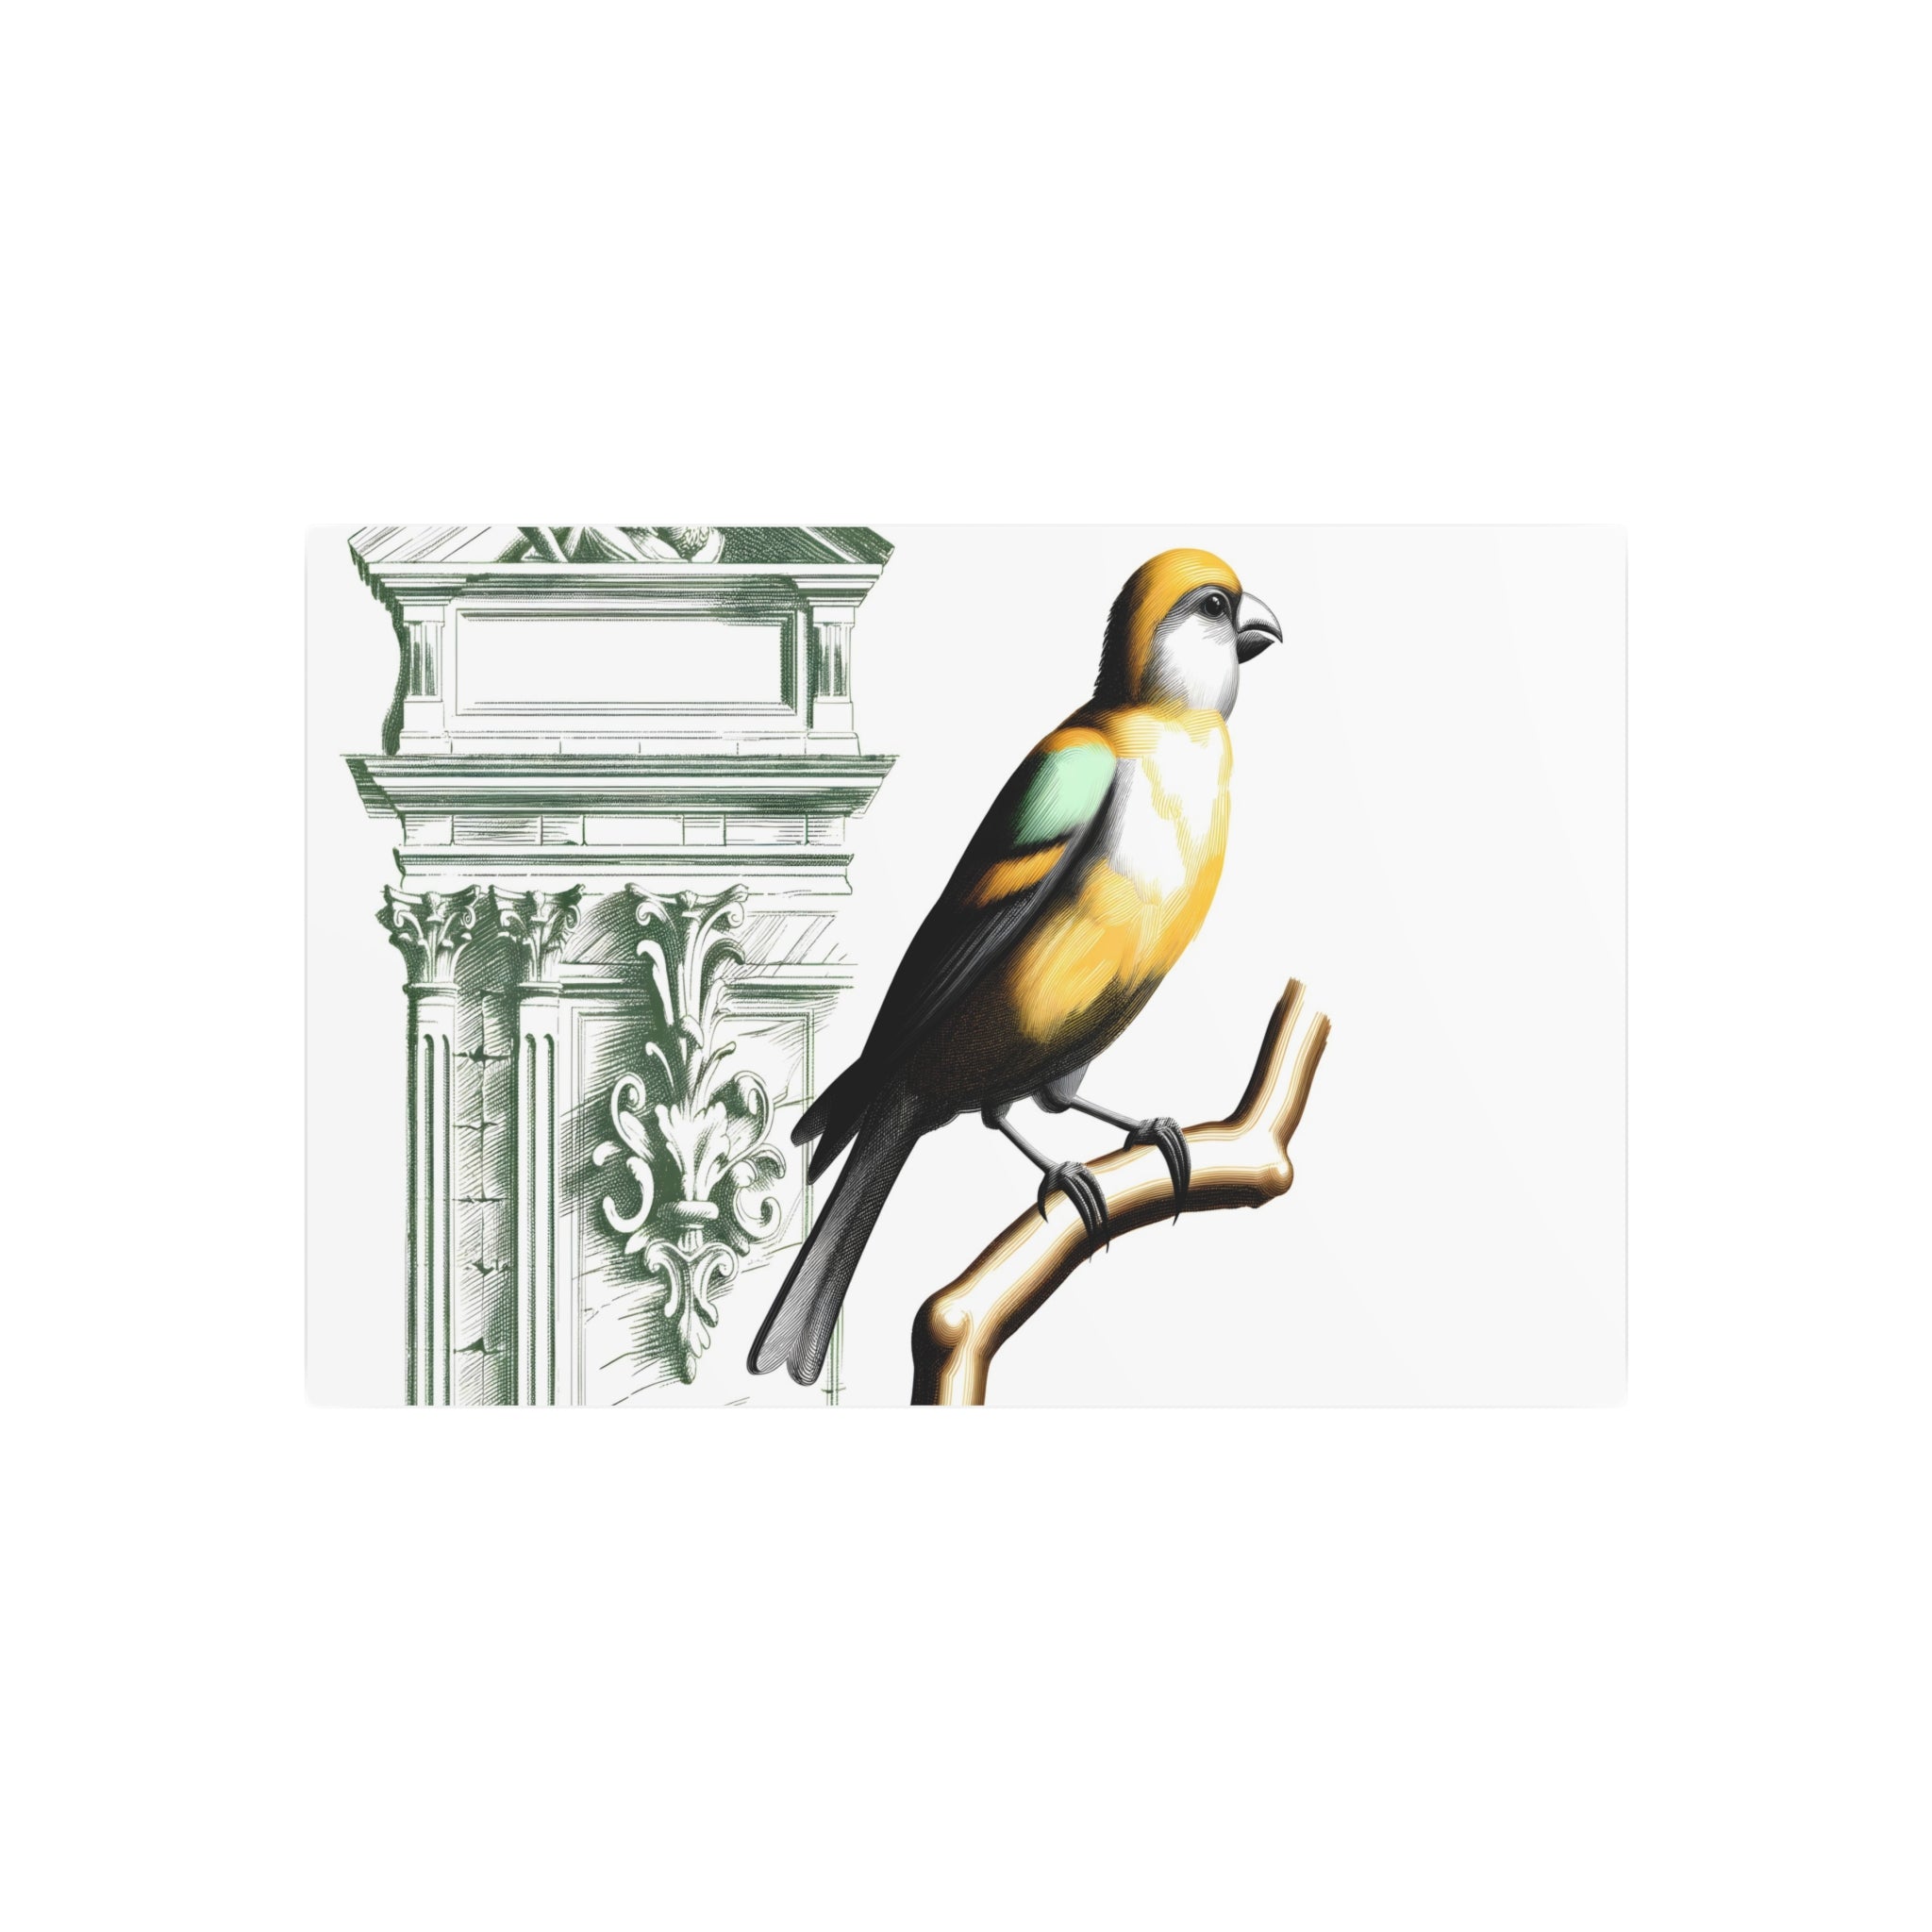 Metal Poster Art | "Neoclassical Style Western Art: Detailed Bird on Branch Scene with Architectural Elements and Dramatic Use of Light, Color, and Contrast" - Metal Poster Art 30″ x 20″ (Horizontal) 0.12''